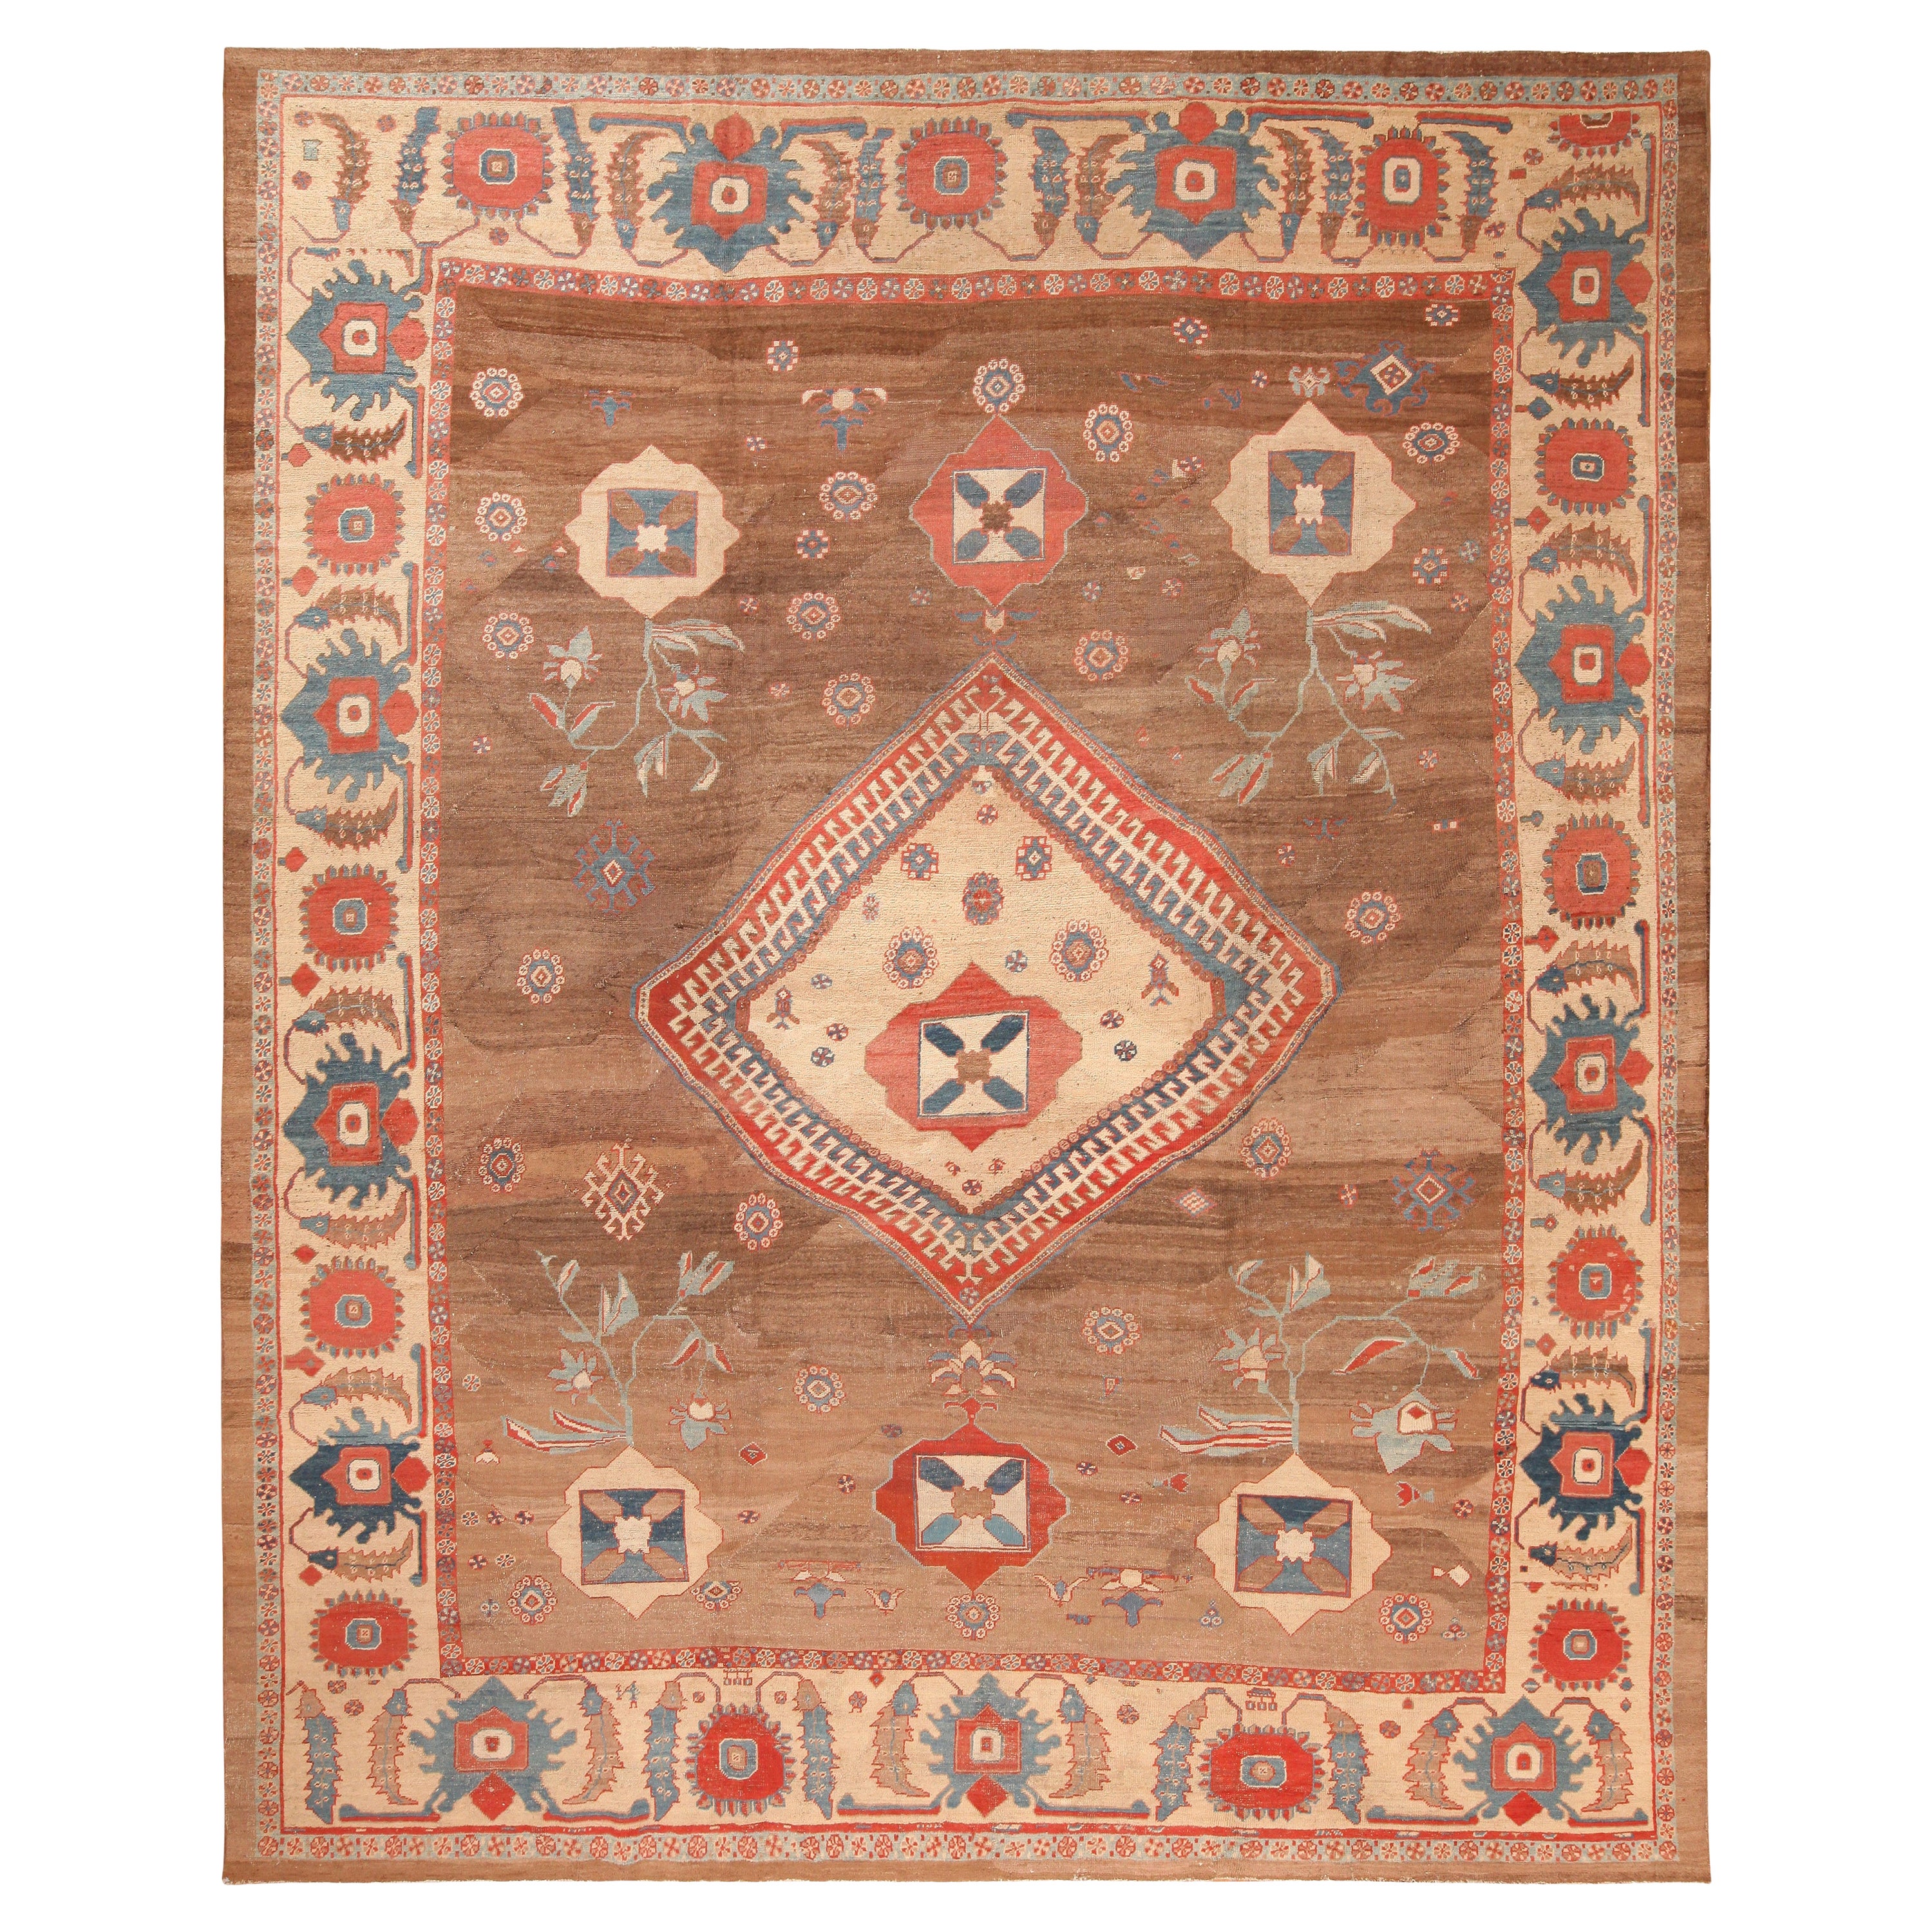 Nazmiyal Collection Antique Persian Bakshaish Rug. 12 ft 2 in x 14 ft 8 in